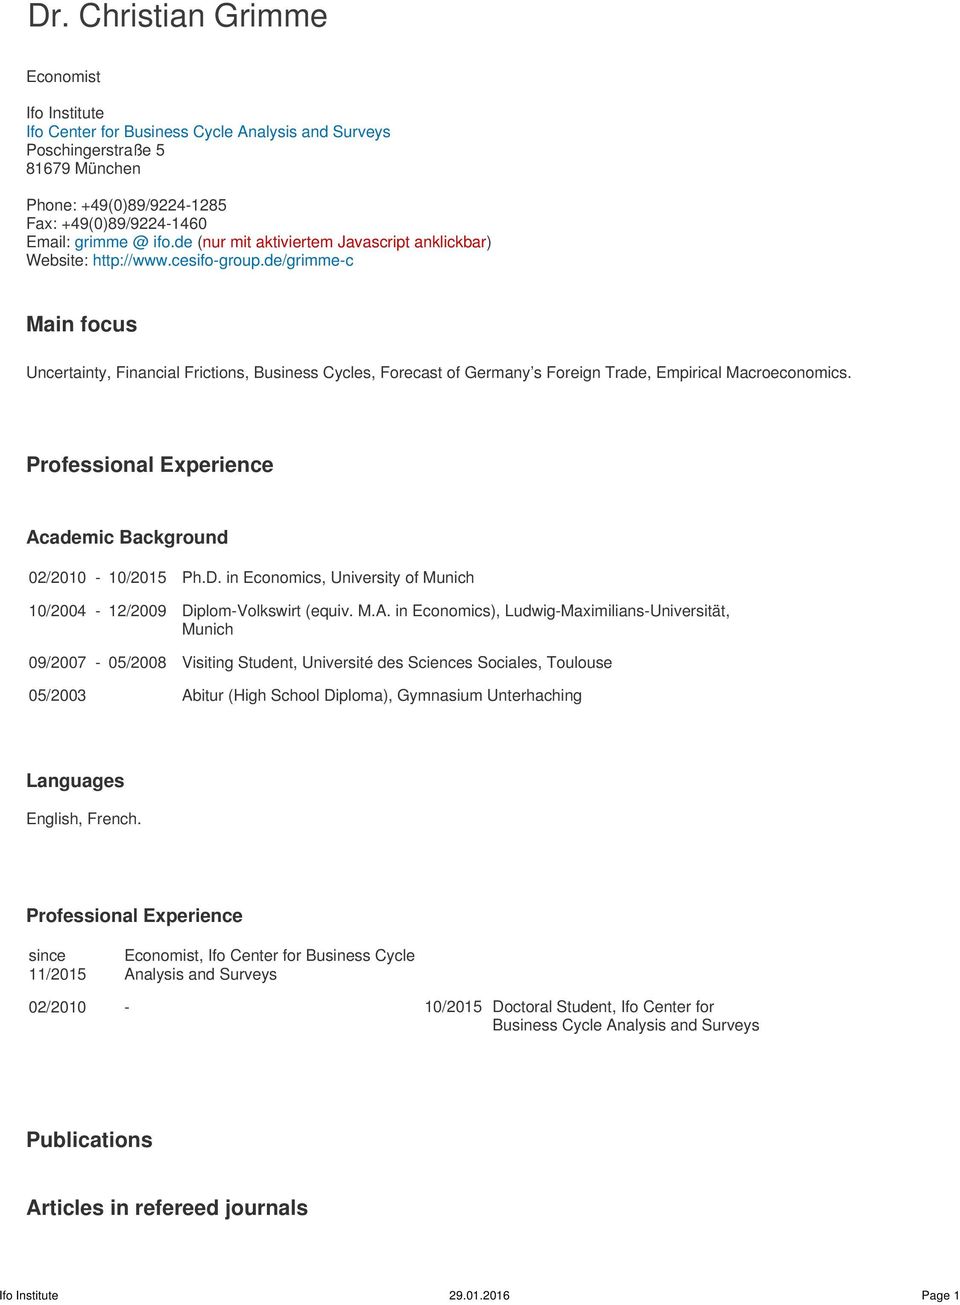 de/grimme-c Main focus Uncertainty, Financial Frictions, Business Cycles, Forecast of Germany s Foreign Trade, Empirical Macroeconomics. Professional Experience Academic Background 02/2010-10/2015 Ph.